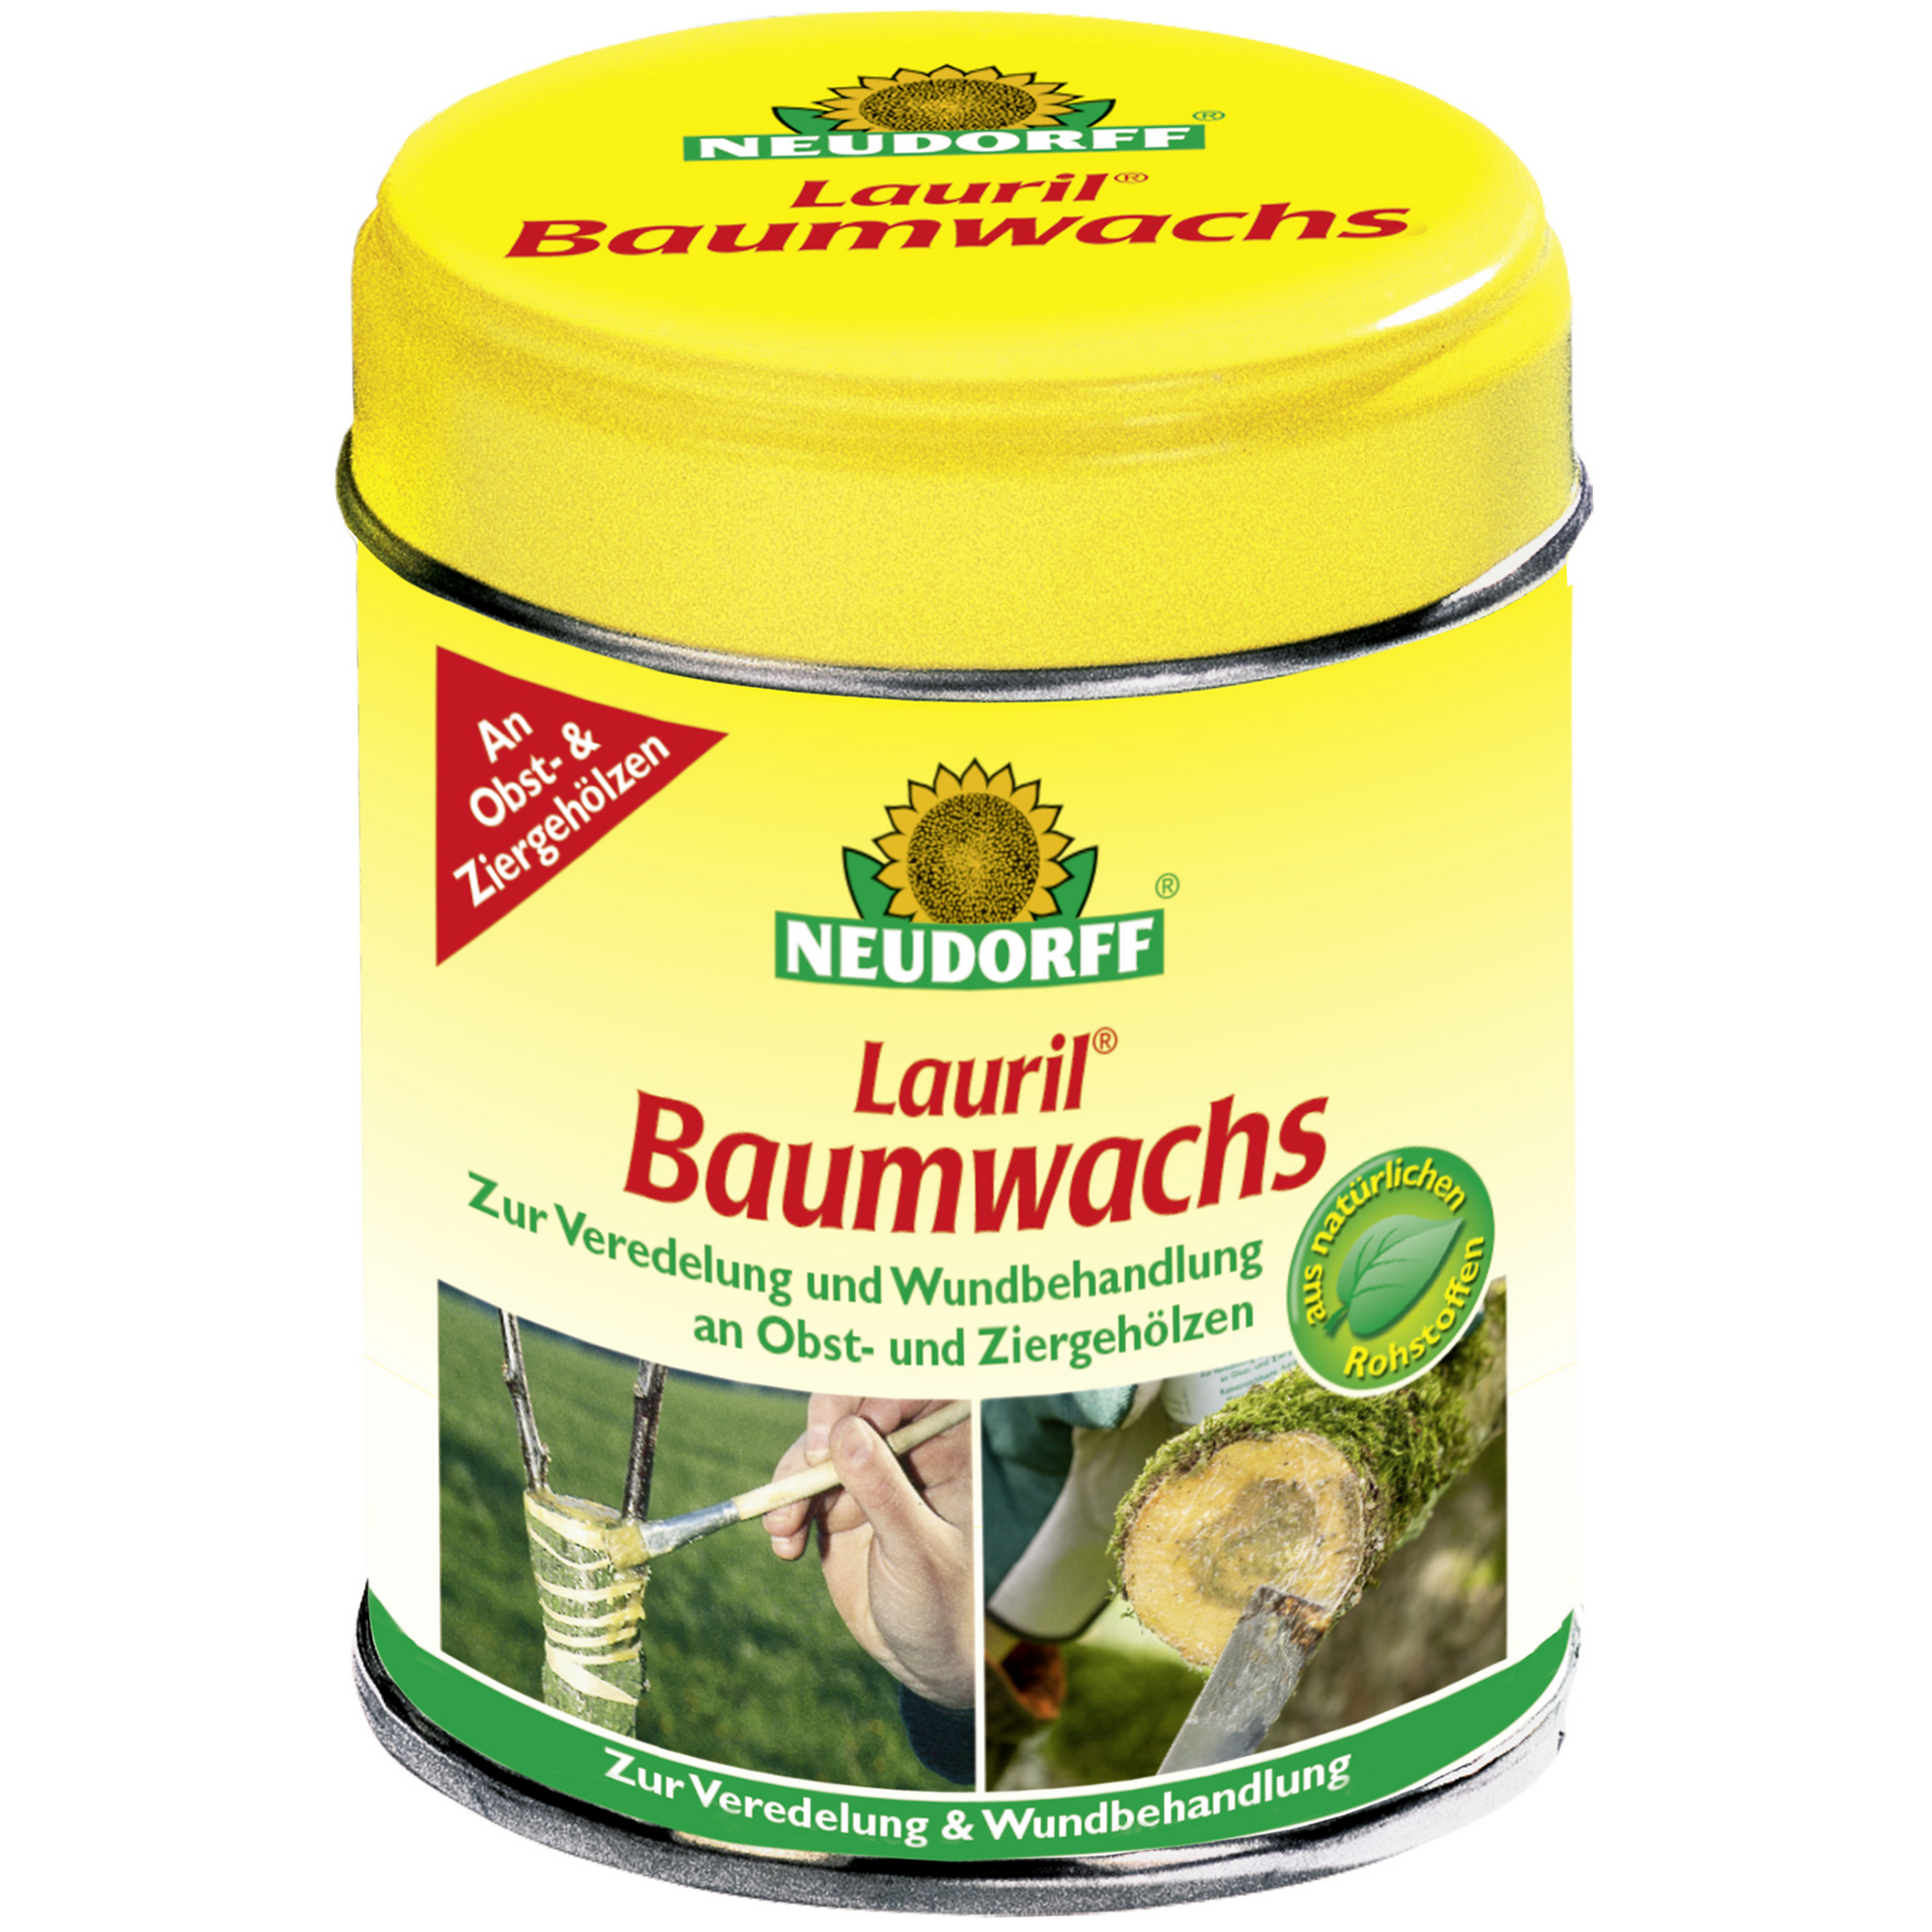 Lauril Baumwachs 125 g + product picture